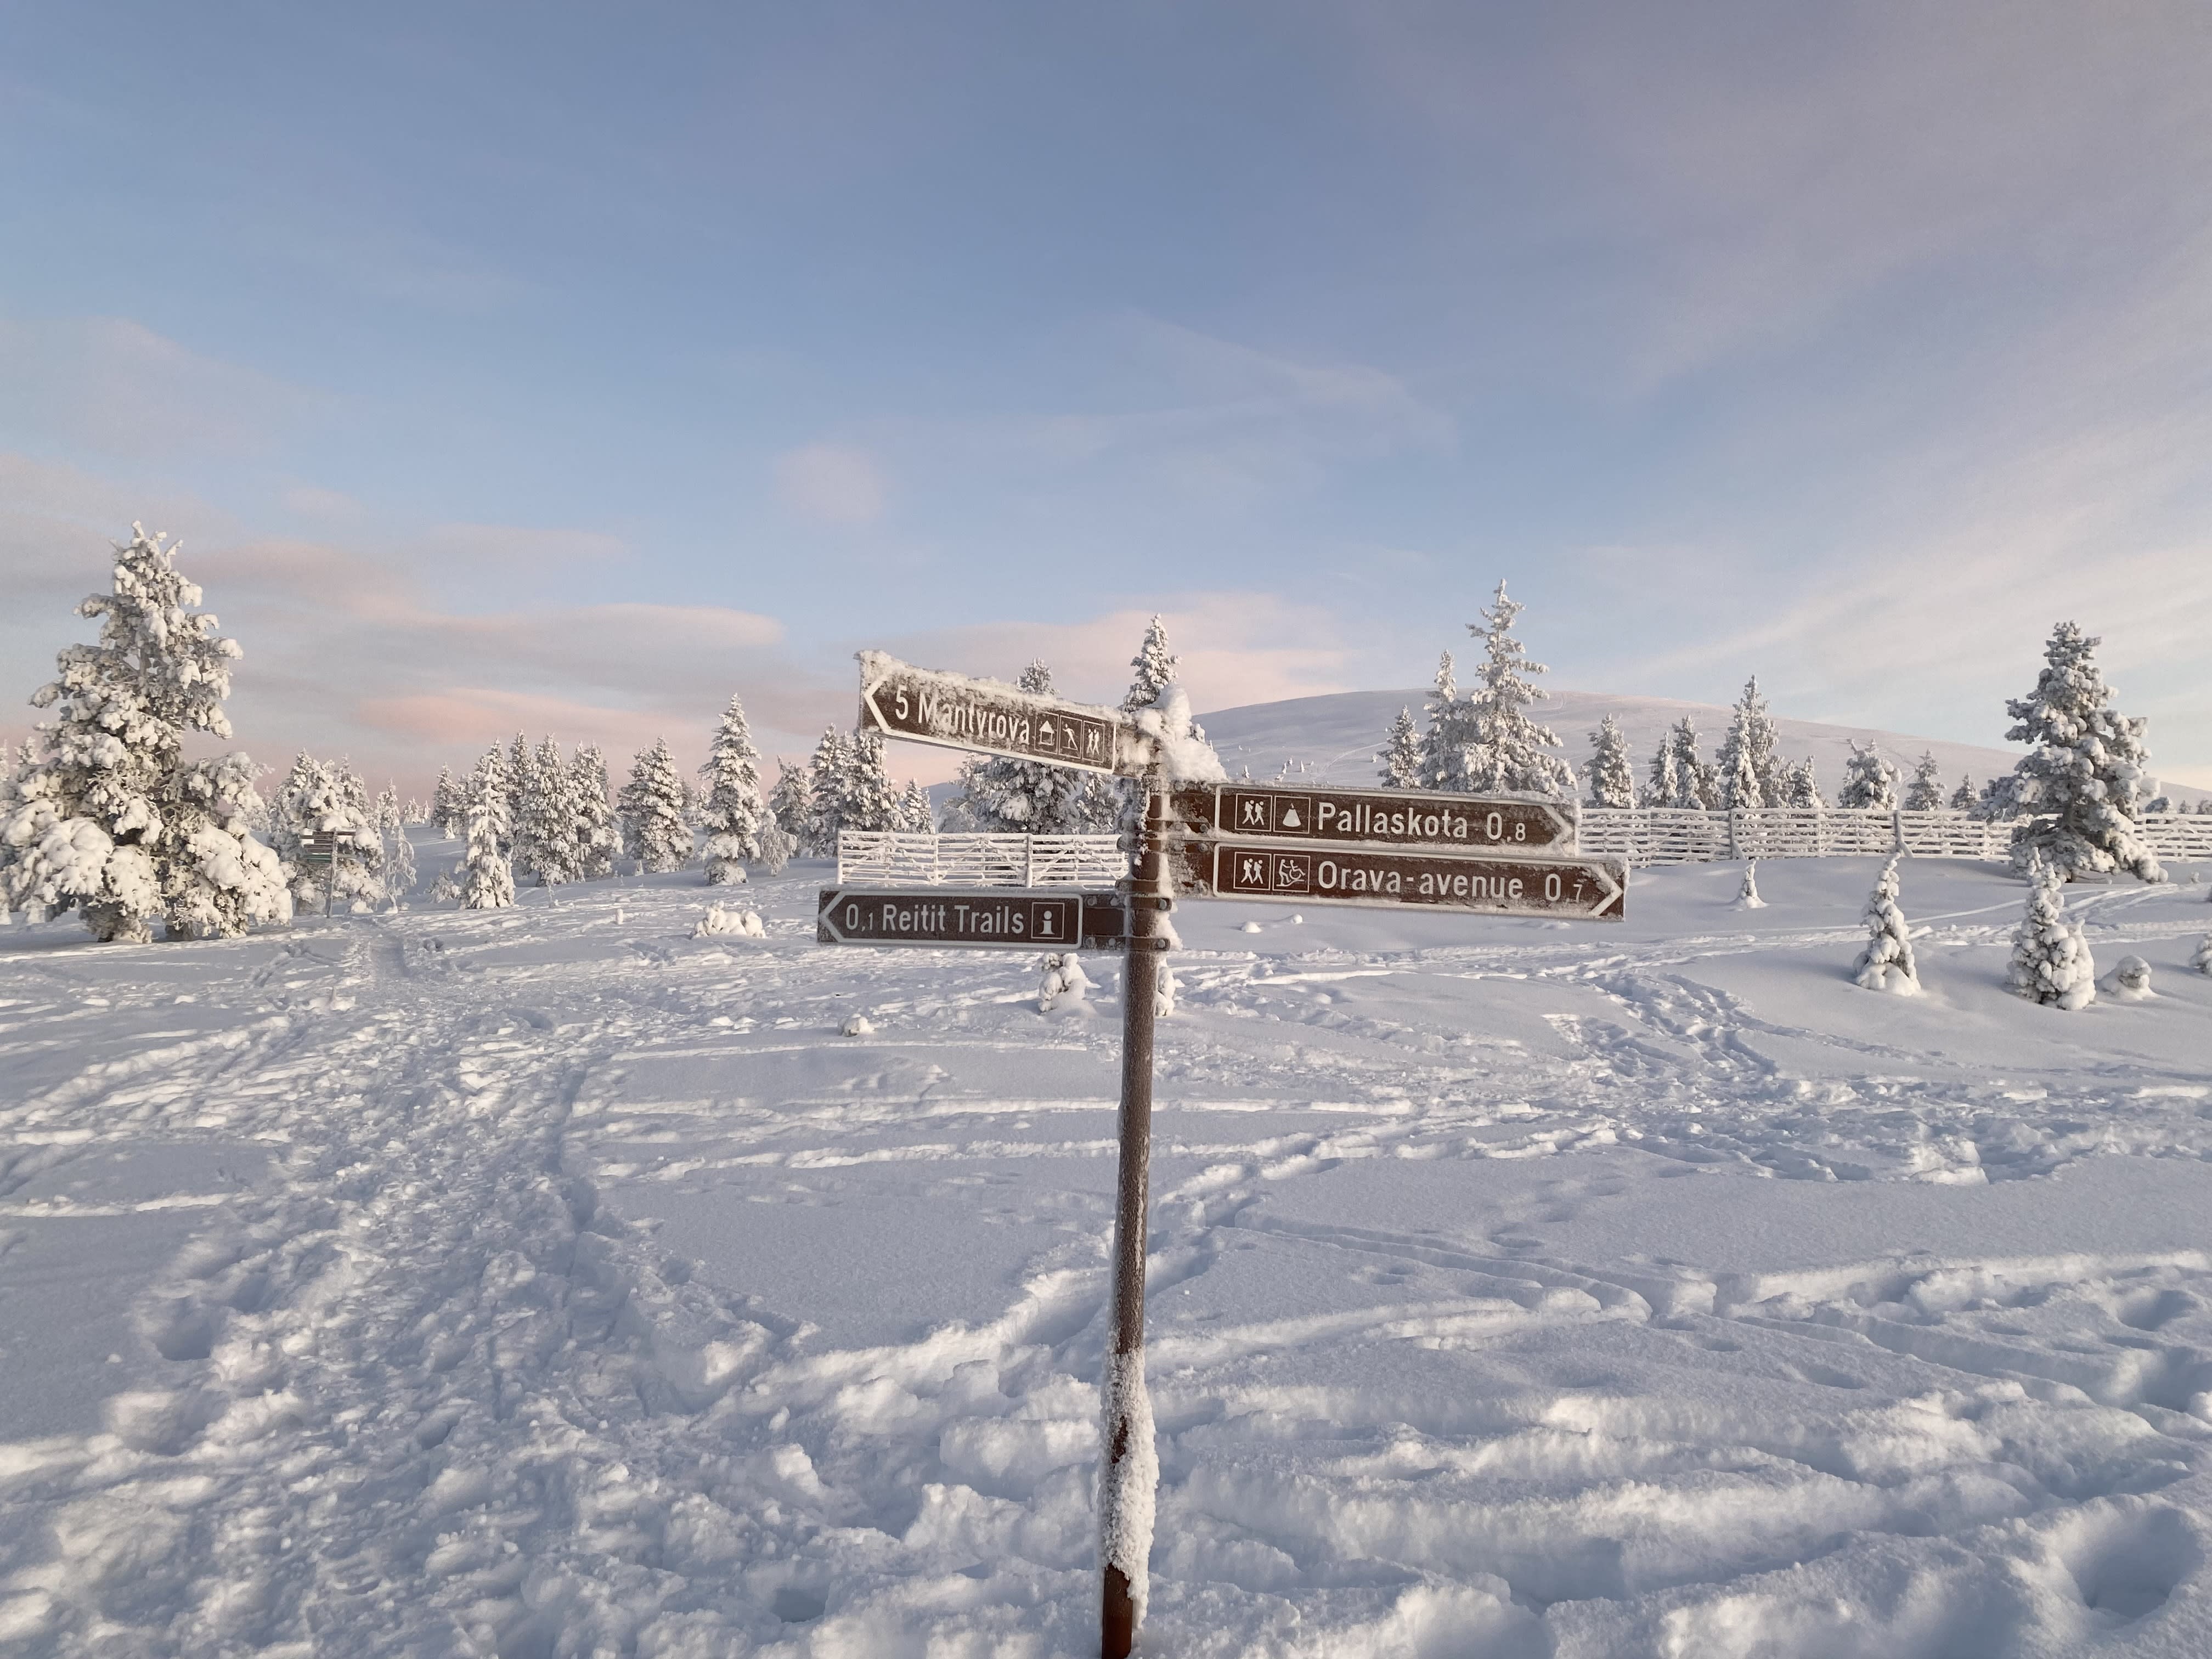 A woman died, a child disappeared in an avalanche in Finnish Lapland